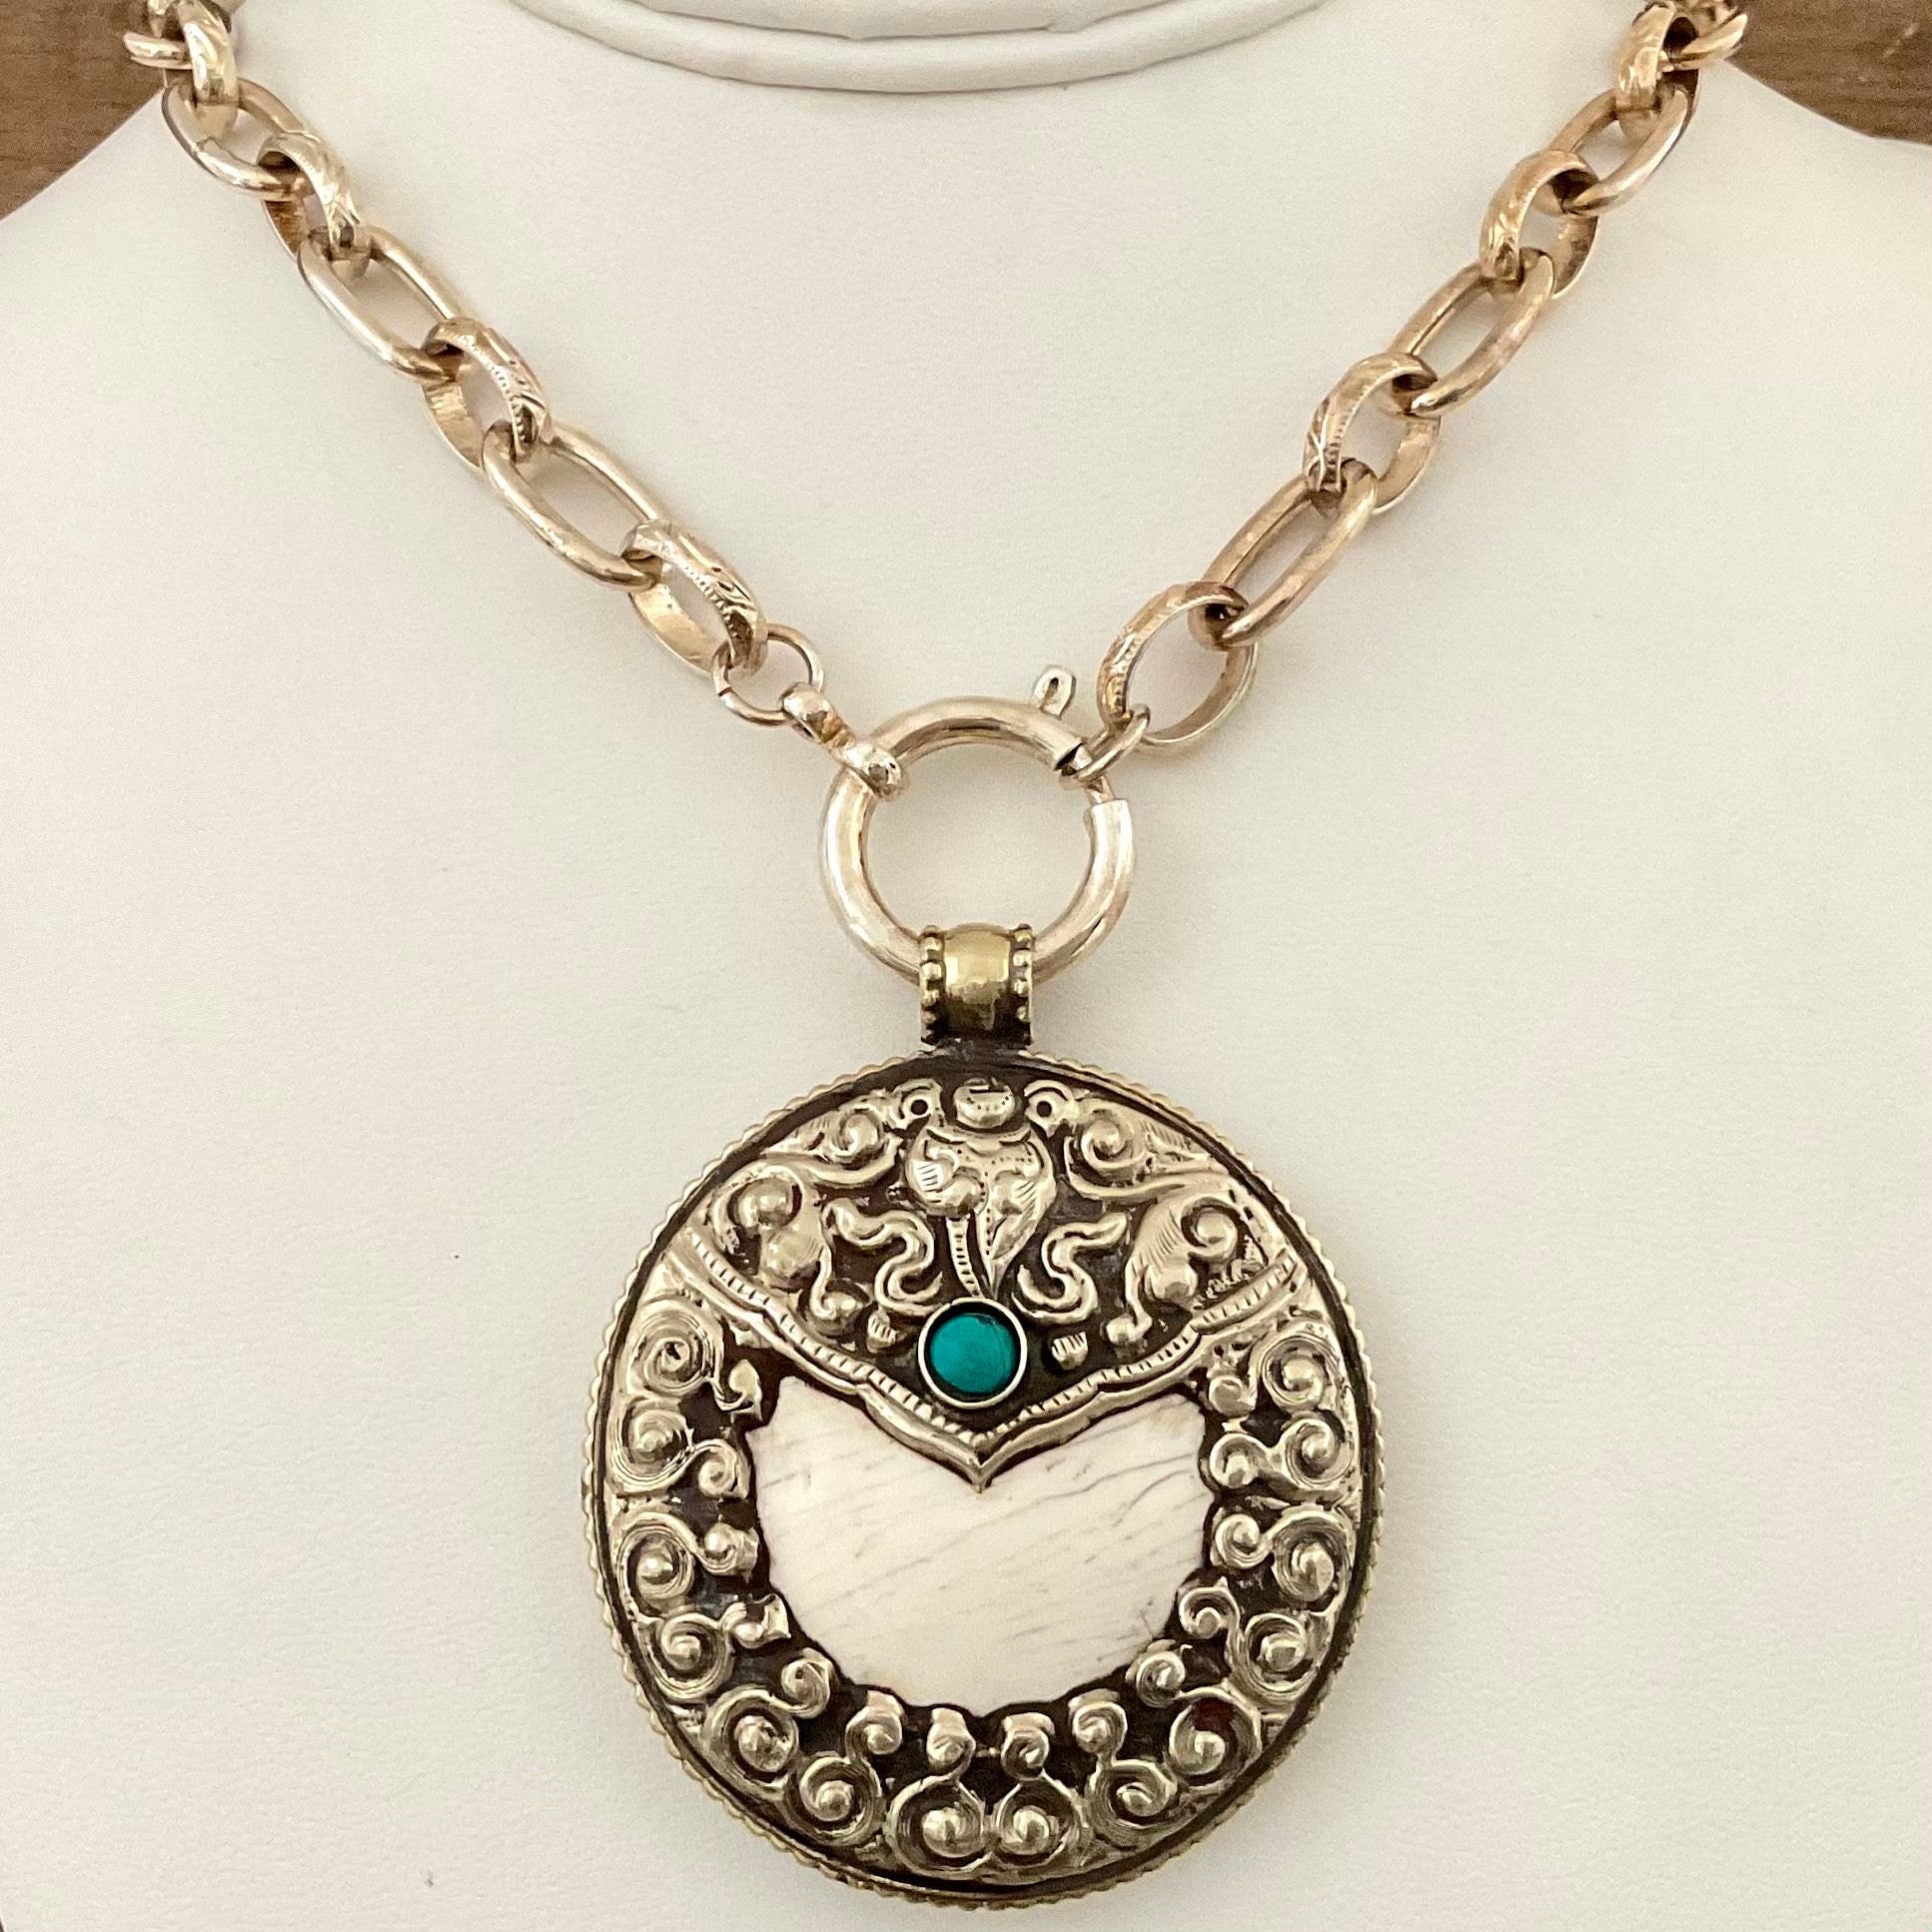 Vintage Sterling Plated Chain with Tibetan Silver, Turquoise & Shell Pendant